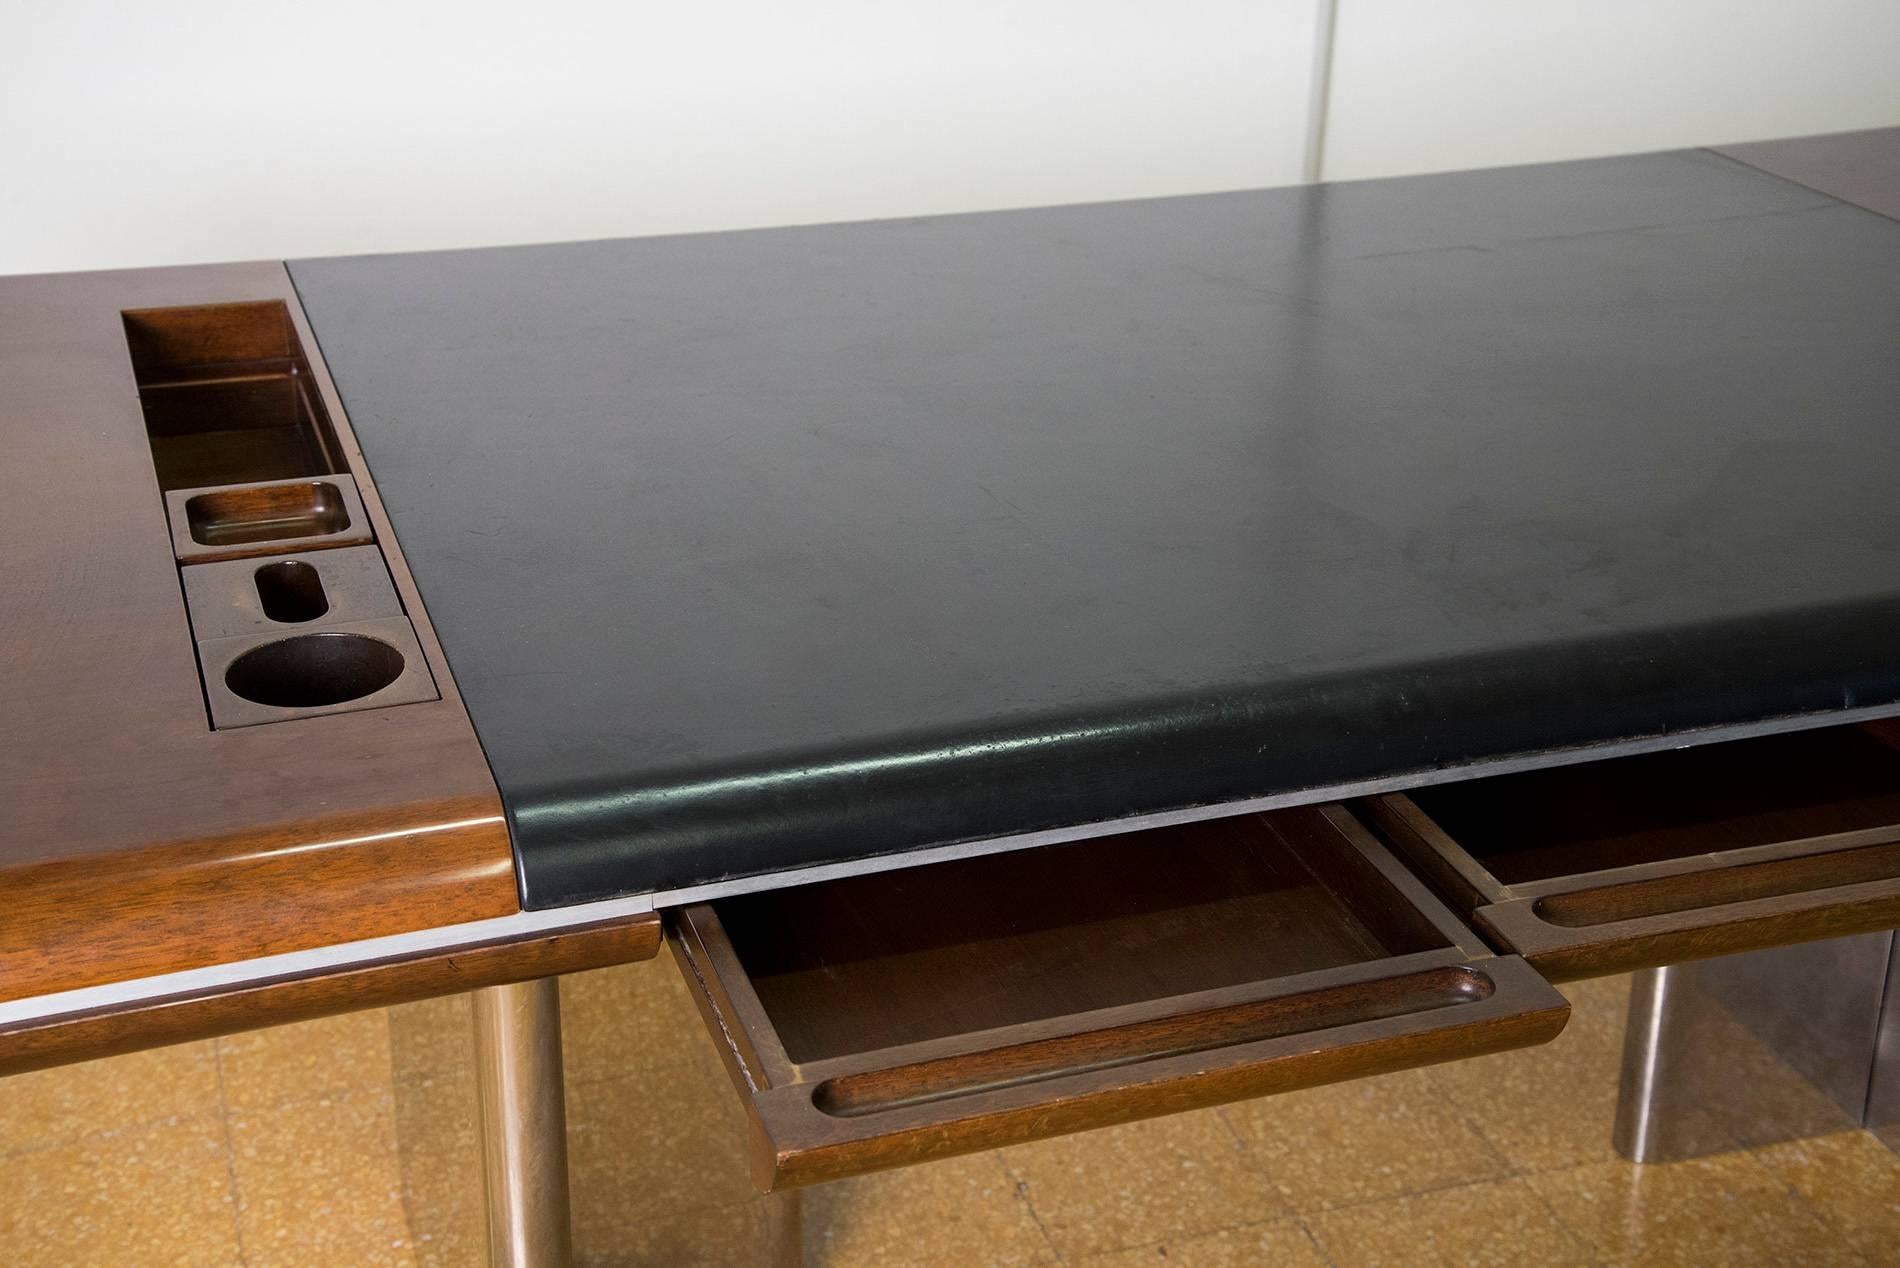 Massive executive desk designed by Hans Von Klier for Skipper in 1970. Stainless steel legs, top in rosewood and black leather with organizing elements, three desks. Good original vintage conditions.